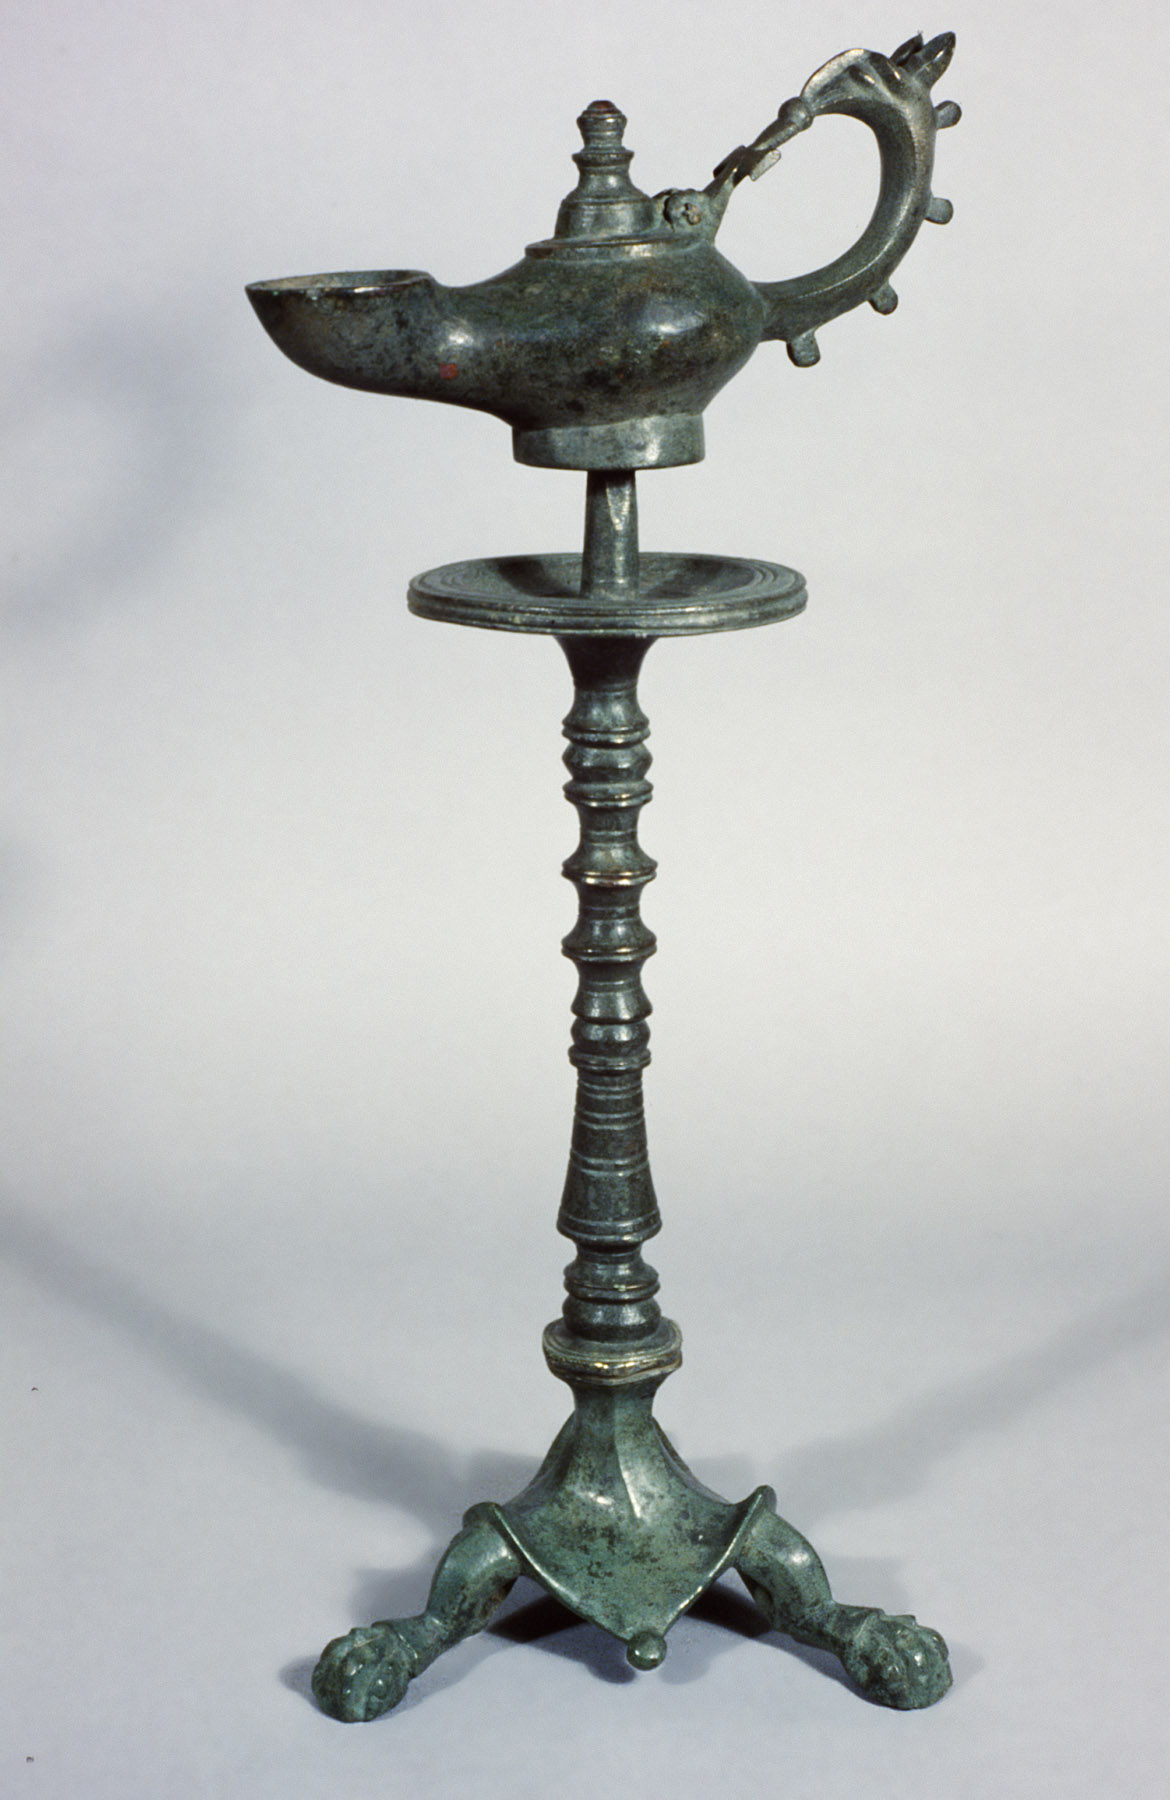 BZ.1950.26–27, Lamp and Stand